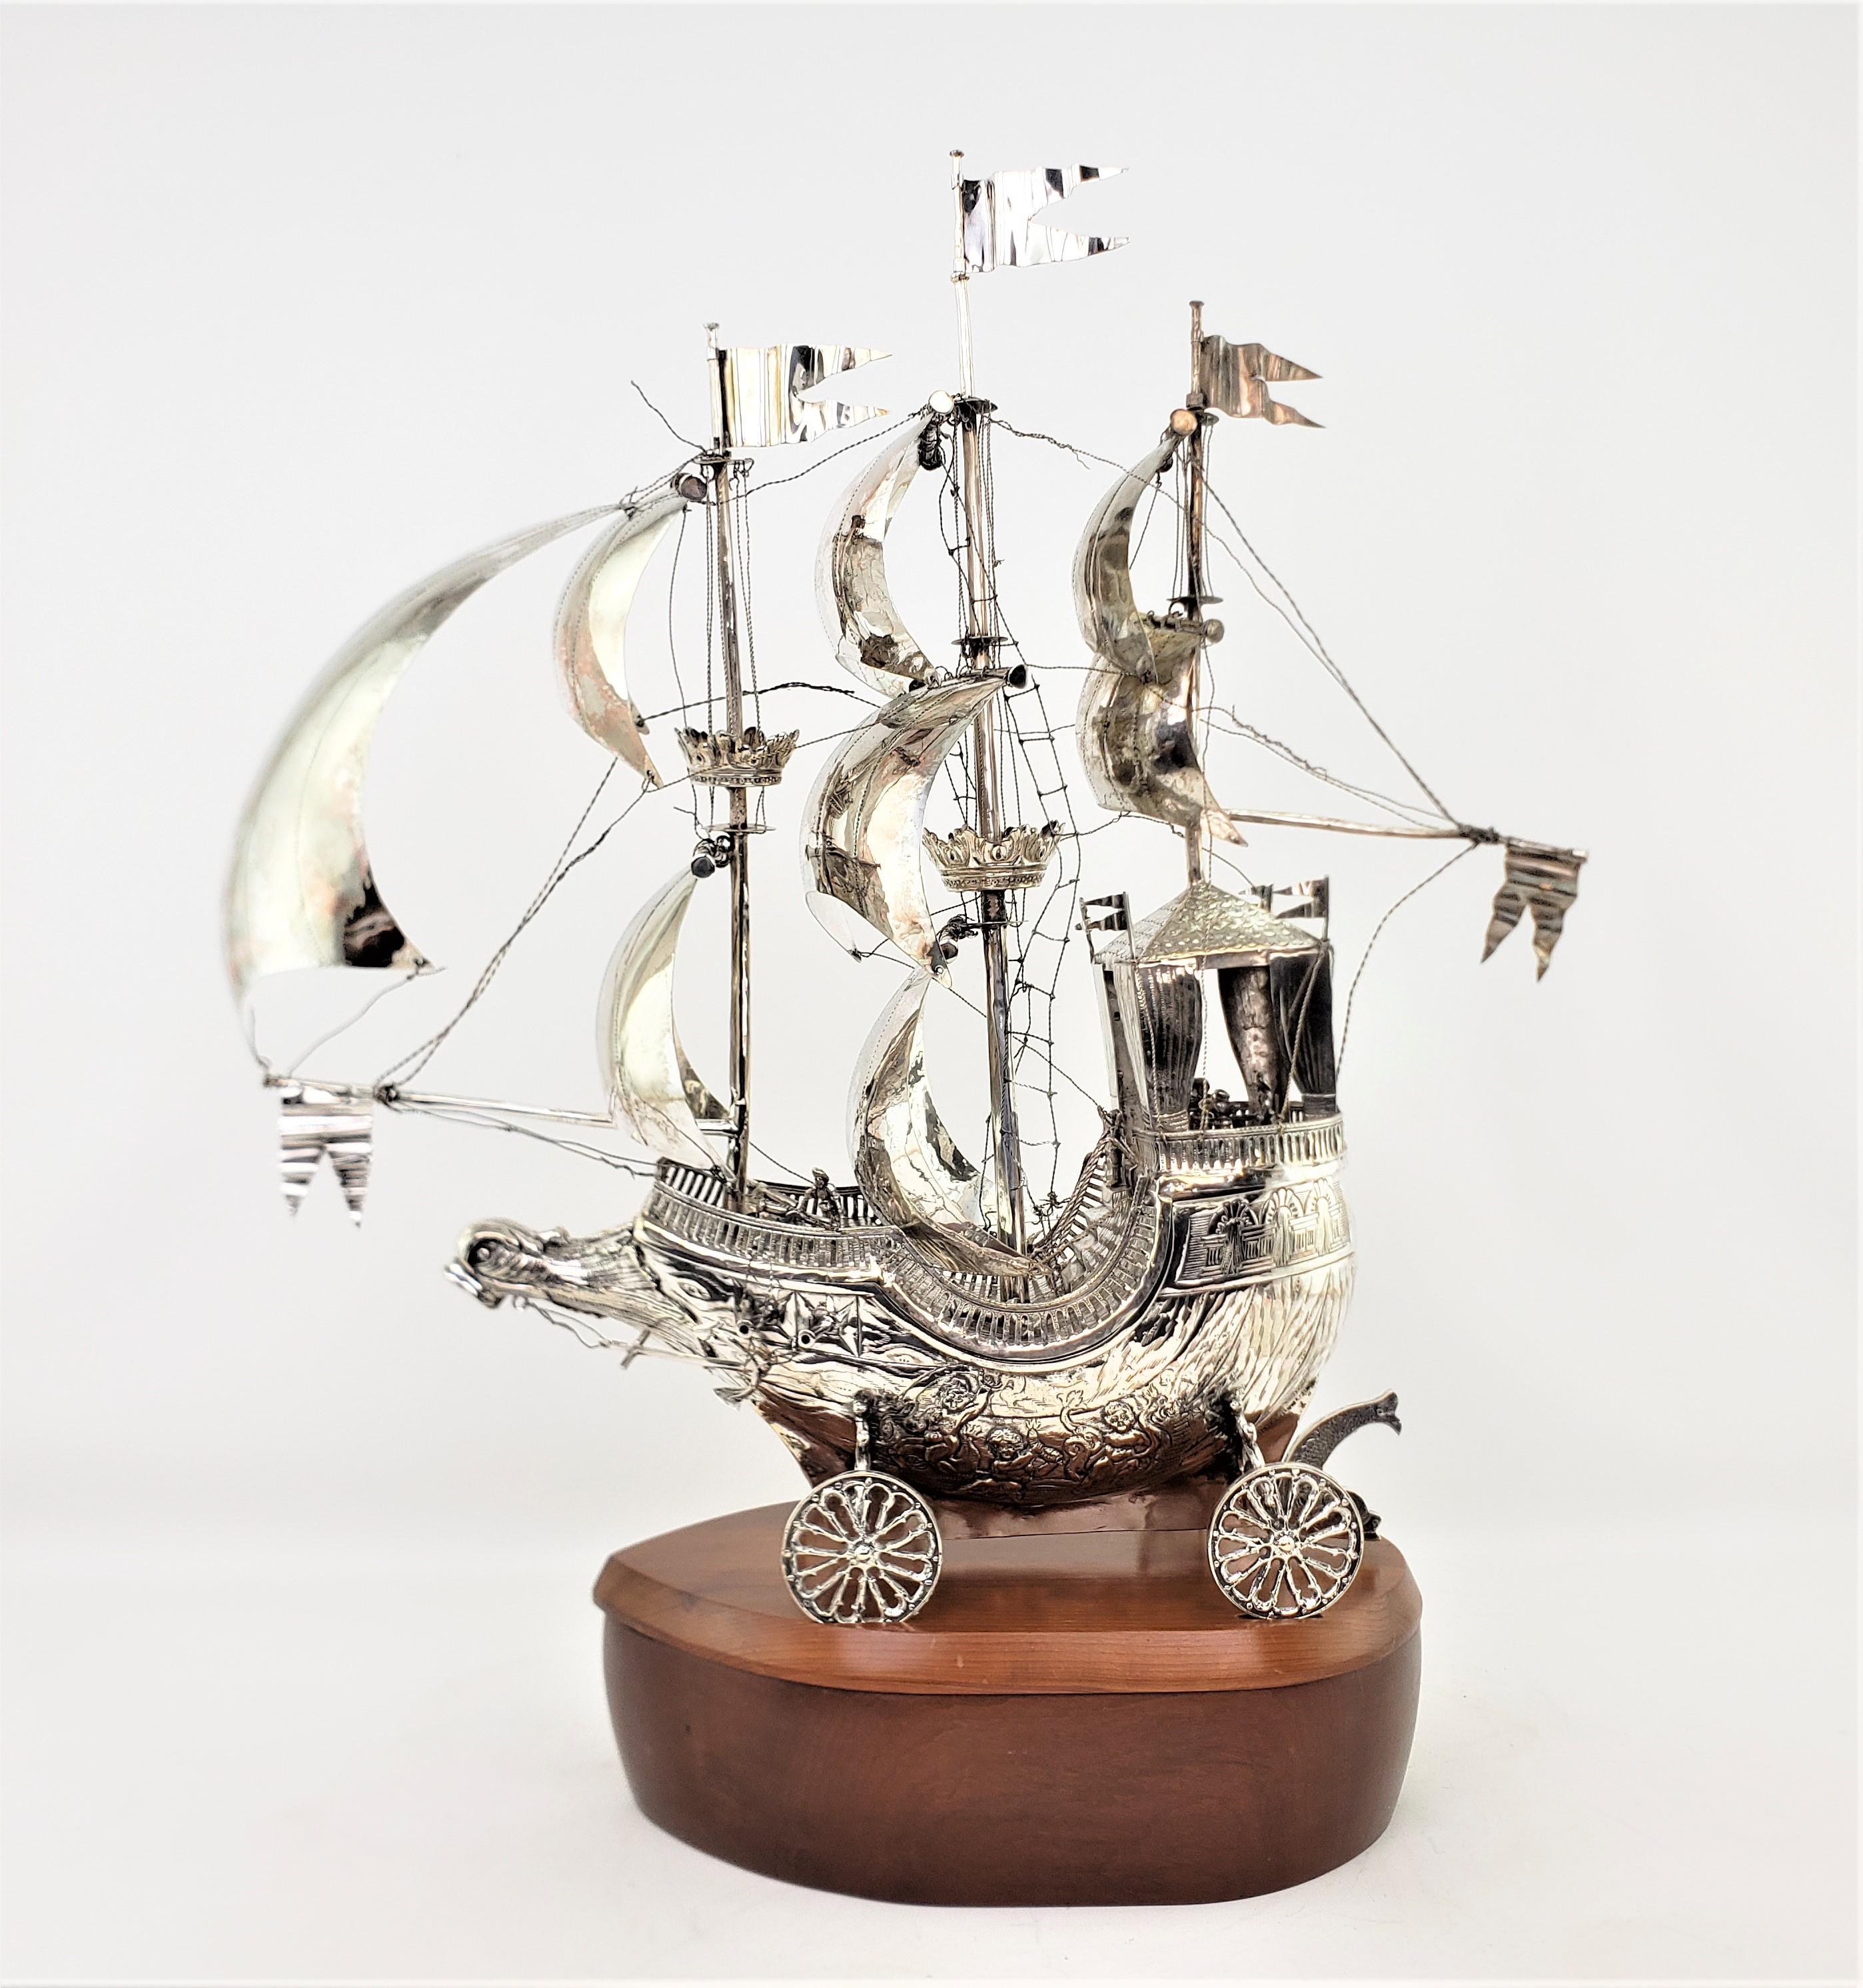 Large Antique Silver Plated Nef or 3 Mast Sailing Ship Sculpture or Centerpiece 12